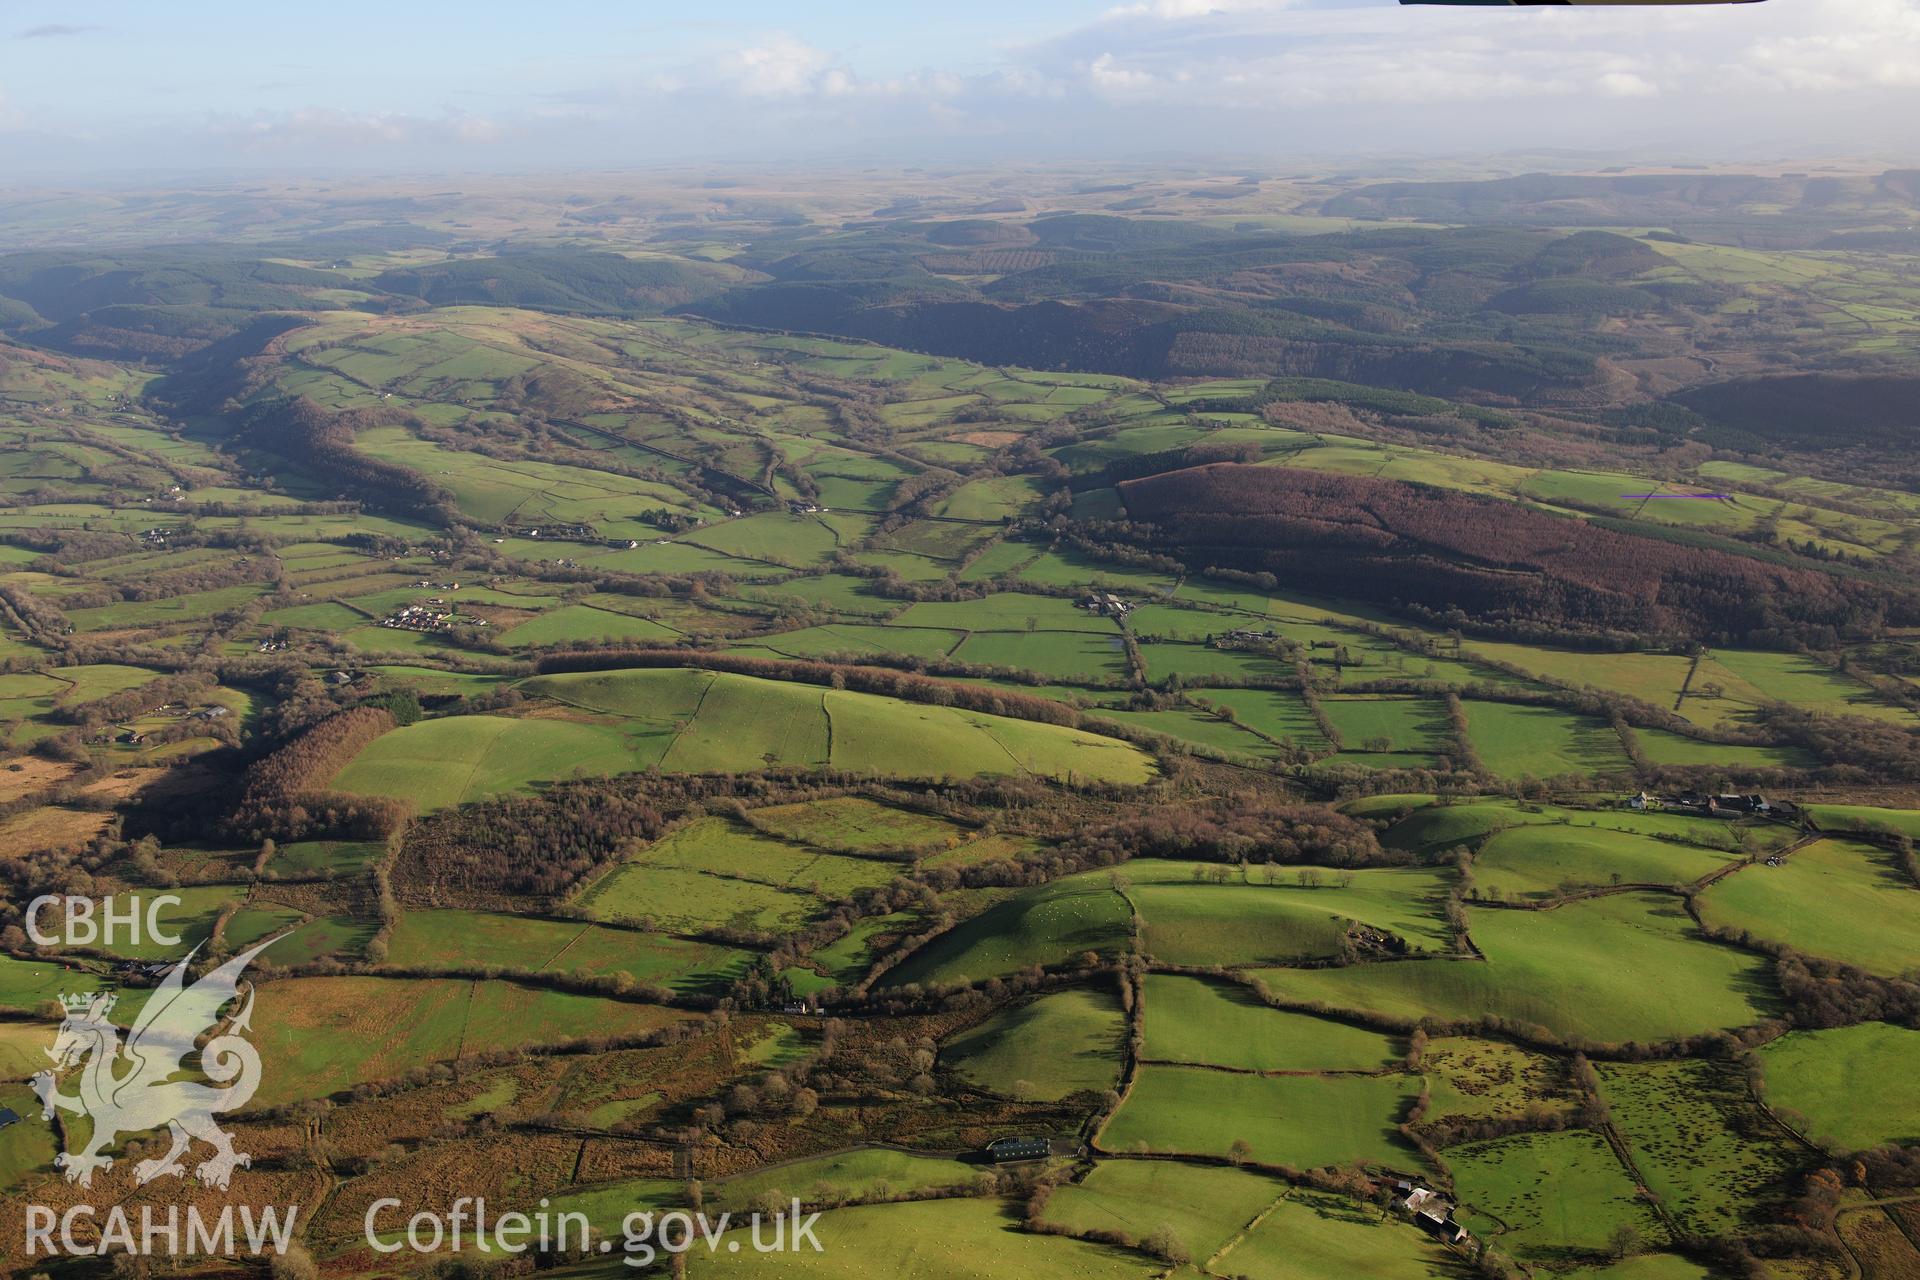 RCAHMW colour oblique photograph of Cynghordy, wide landscape view from west. Taken by Toby Driver on 23/11/2012.